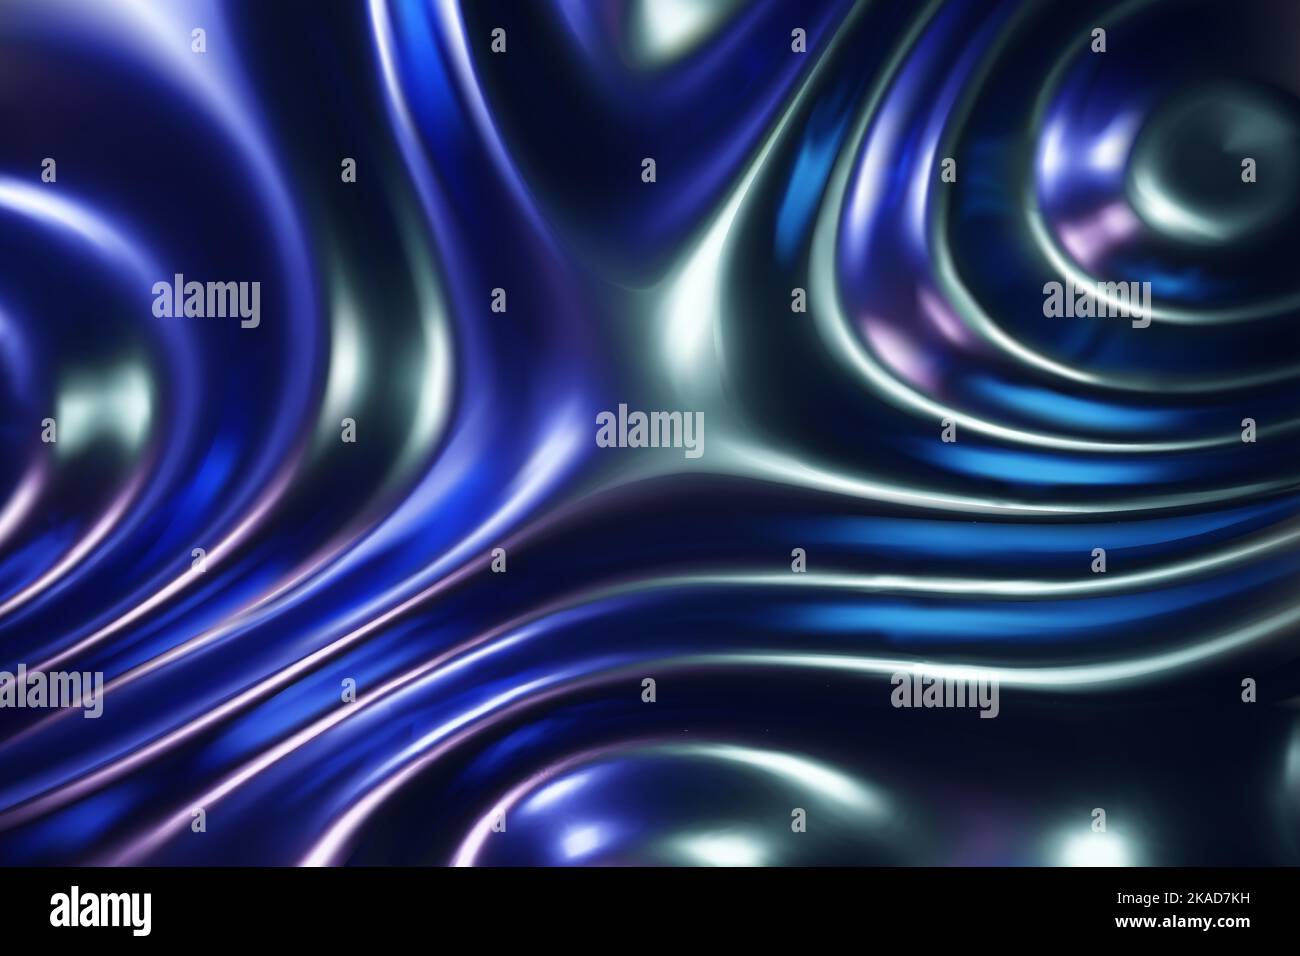 Blue liquid molten metal abstract wavy background with light reflects Stock Vector